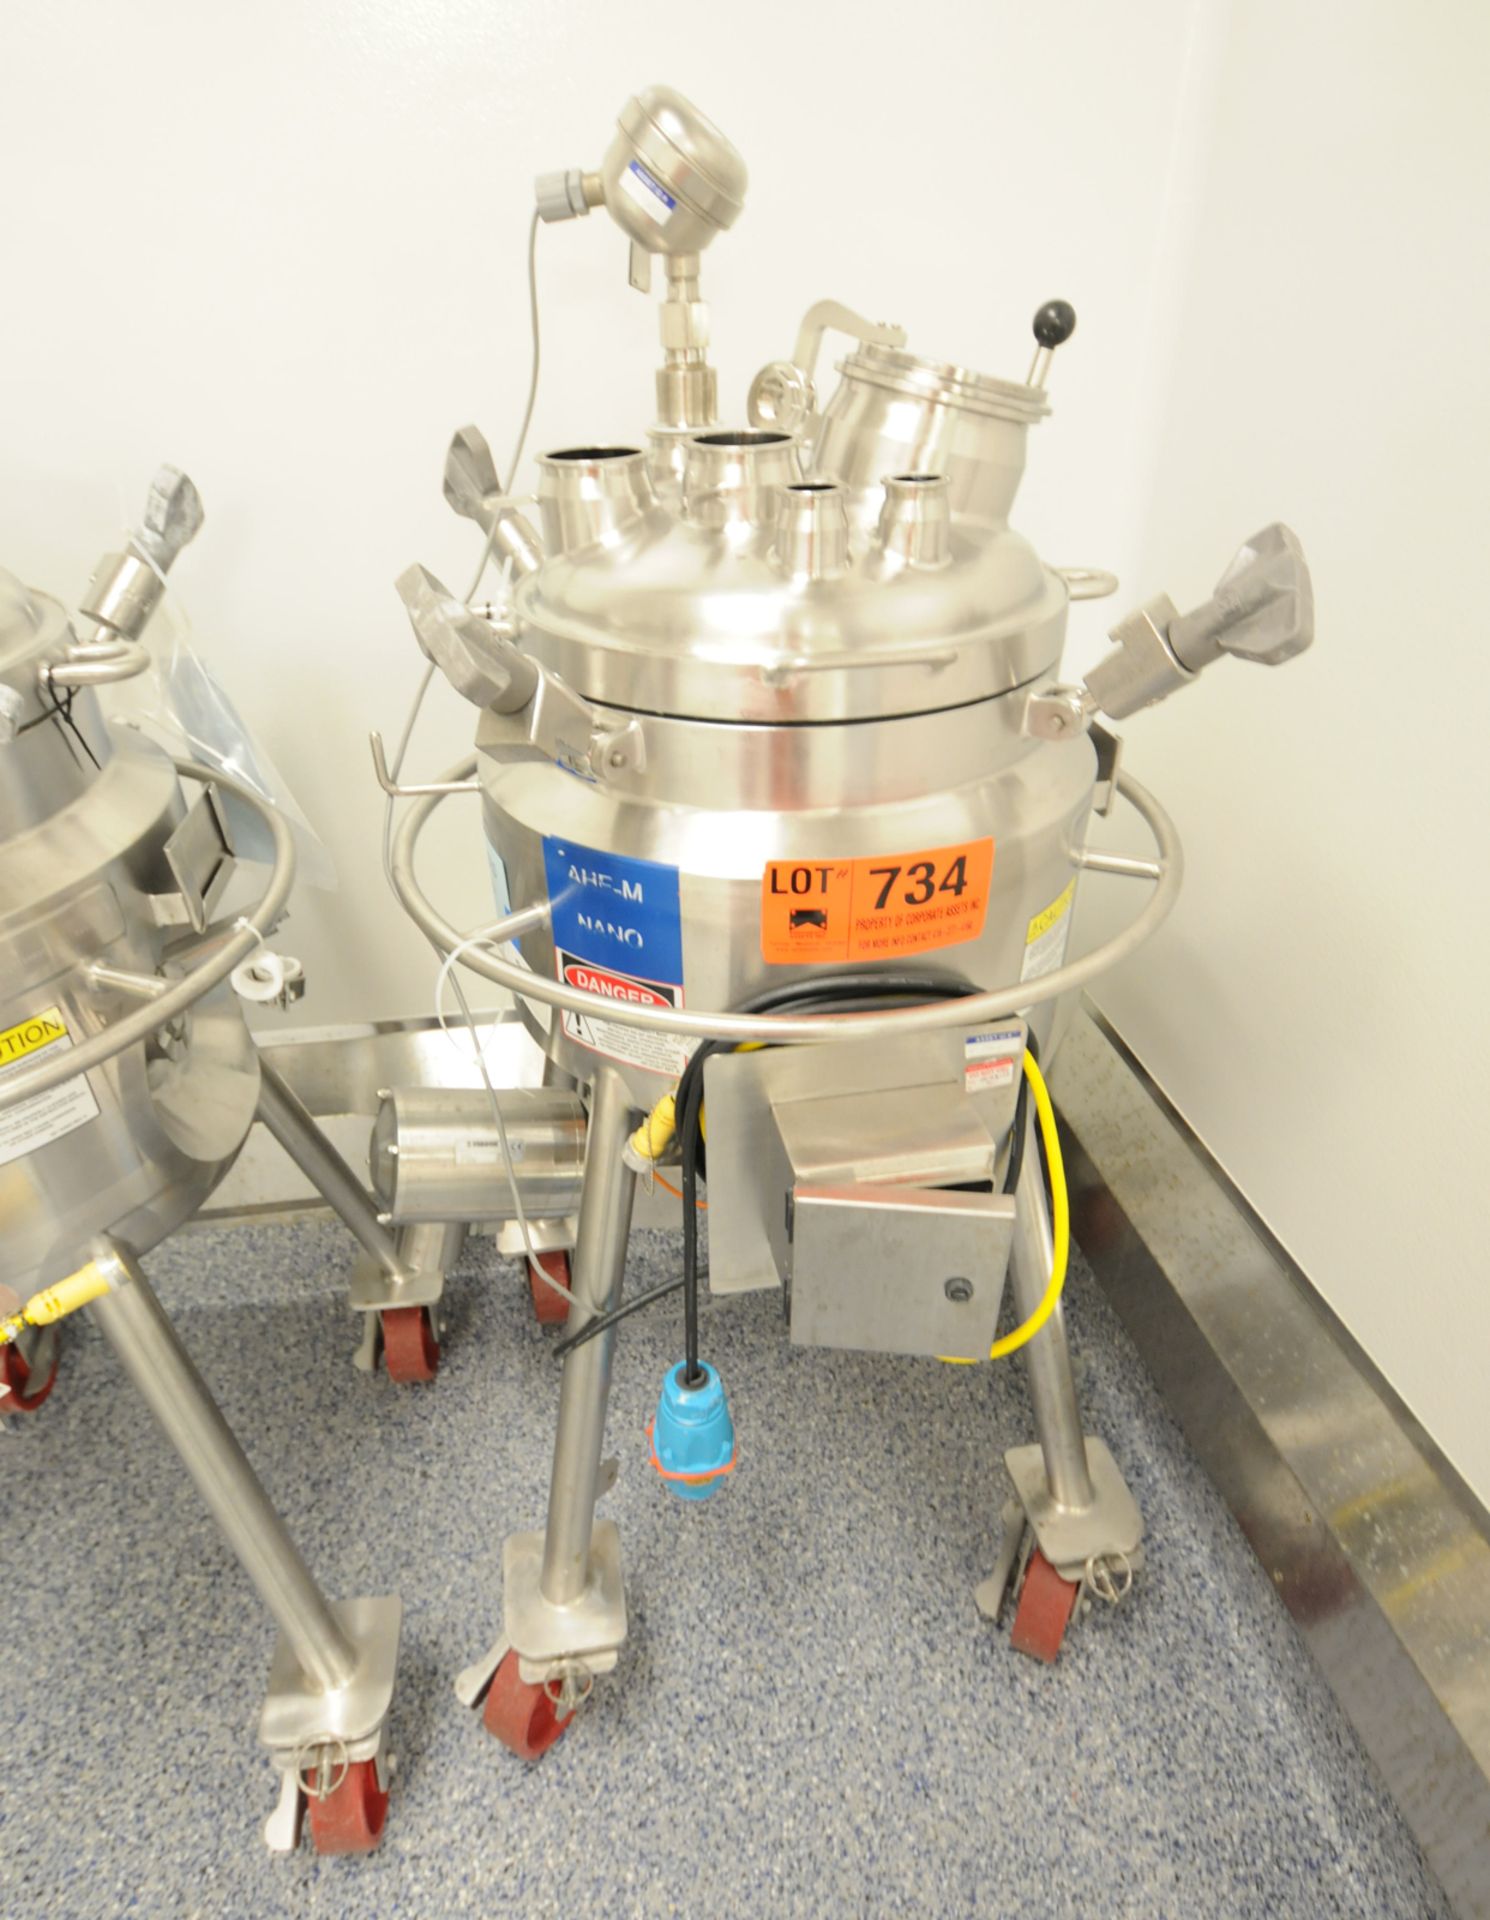 DCI (2009) AHF-M NANO PORTABLE JACKETED STAINLESS STEEL REACTOR VESSEL WITH 50 LITER CAPACITY, 45